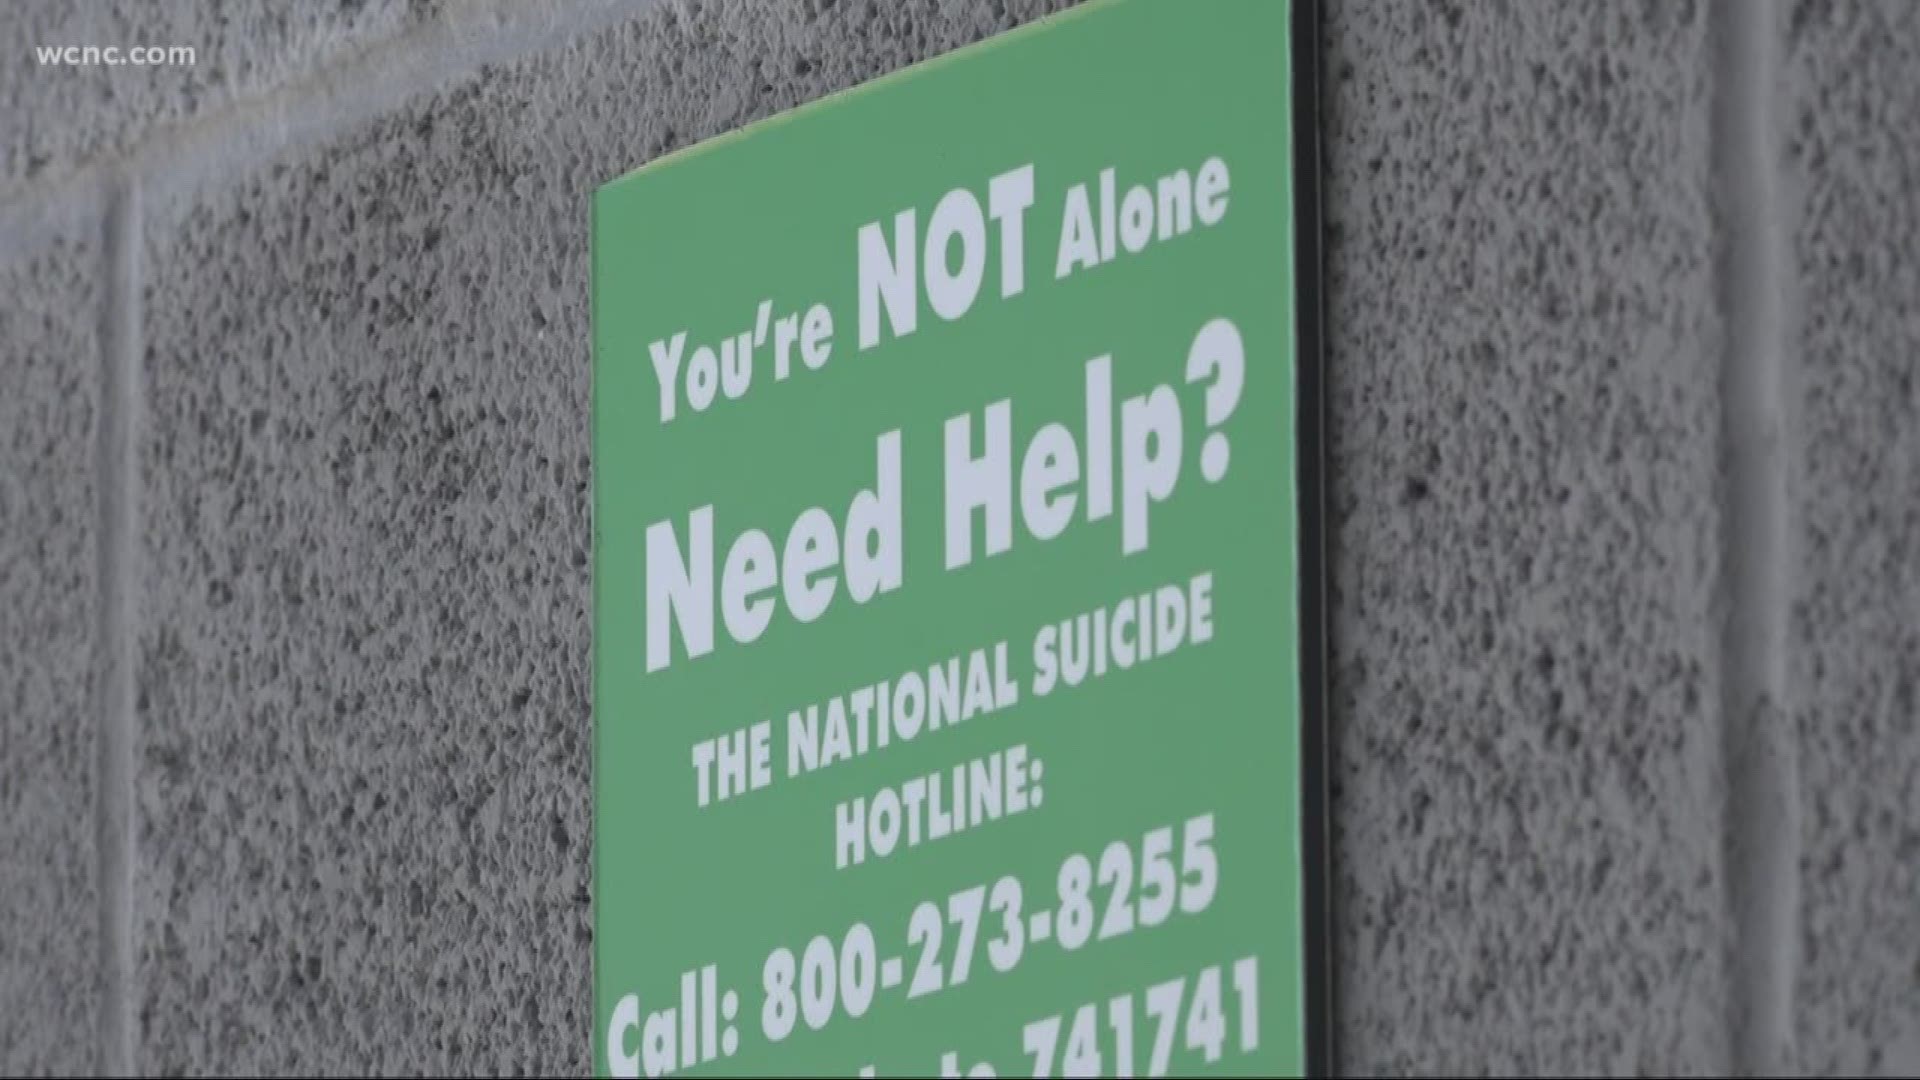 Fonda Bryant said she wanted to do something to prevent suicide at that location after hearing some of the statistics of people who have taken their own lives.